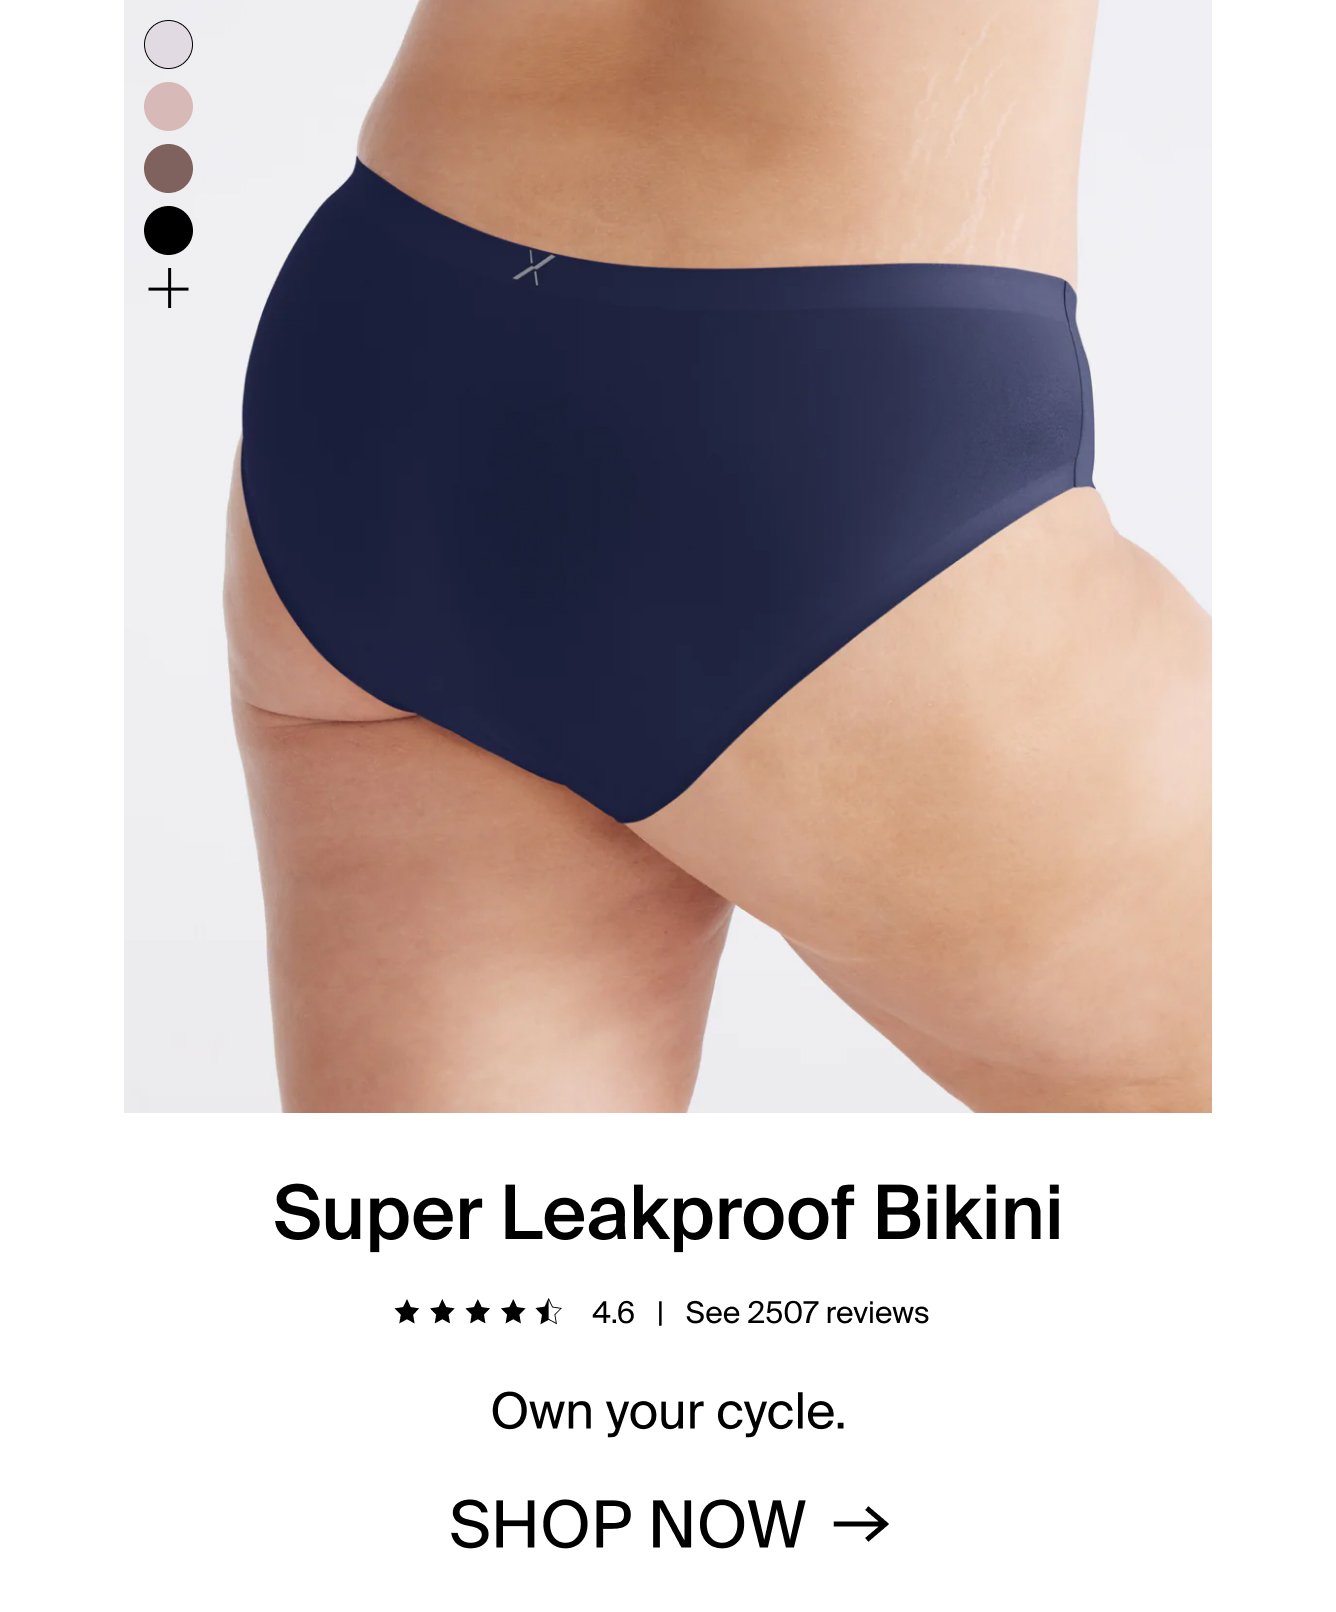 Super Leakproof Bikini: 4.6 stars. See 2507 reviews. Own your cycle. SHOP NOW.